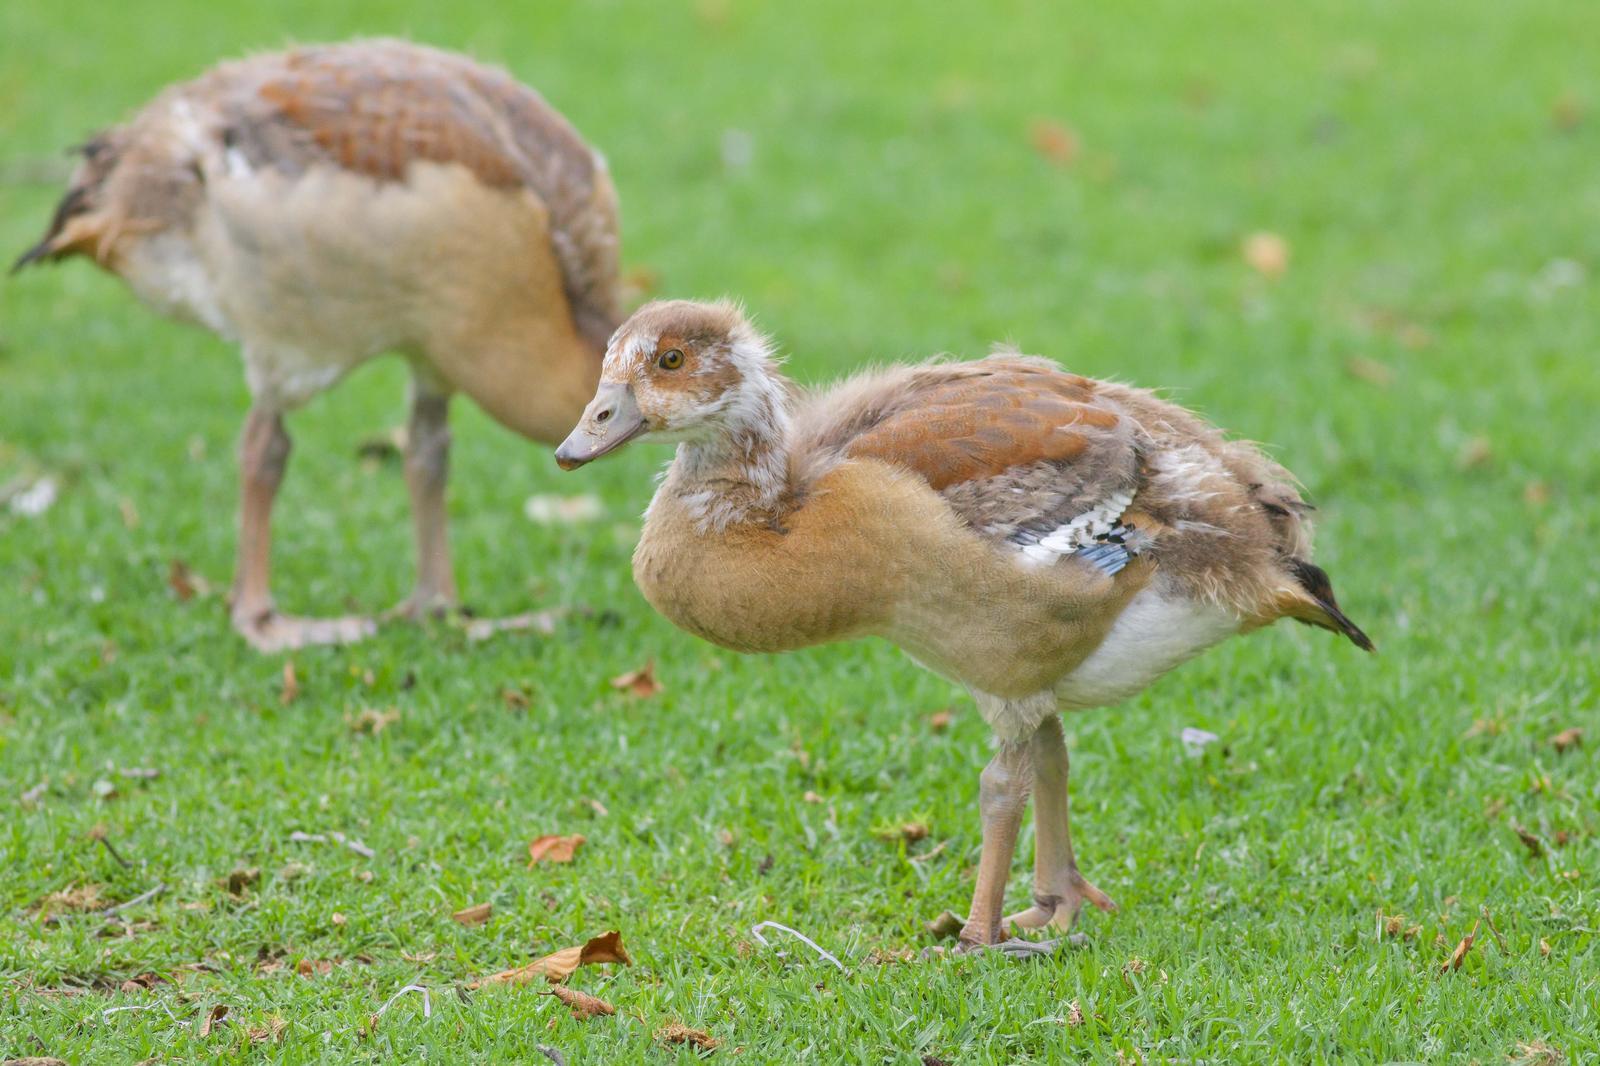 Egyptian Goose Photo by Tom Ford-Hutchinson